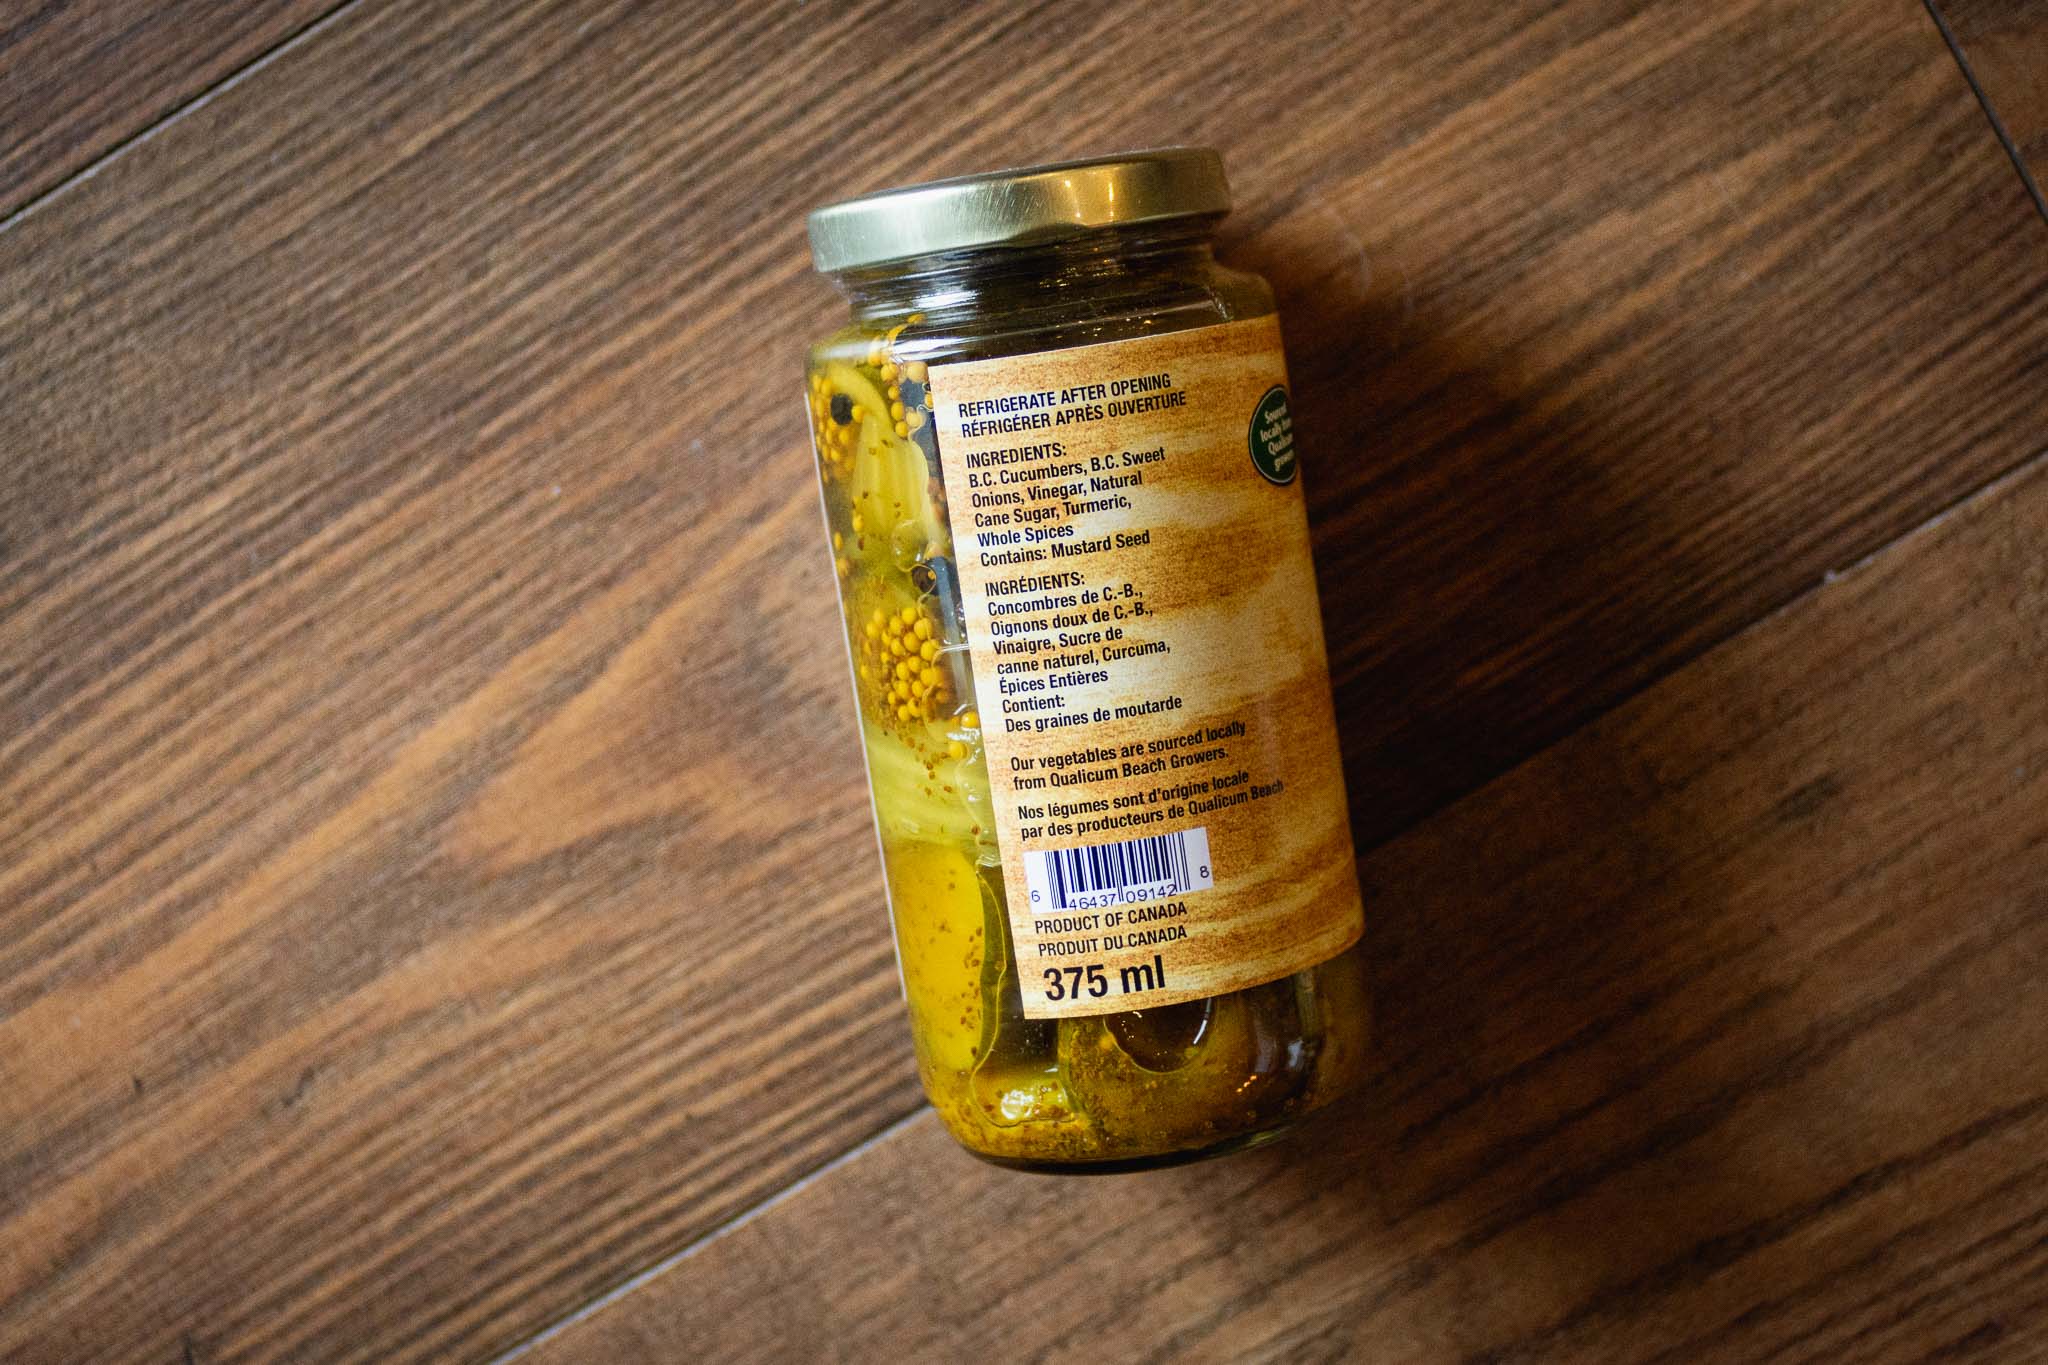 Bread & Butter Pickles by Catie’s Preserves